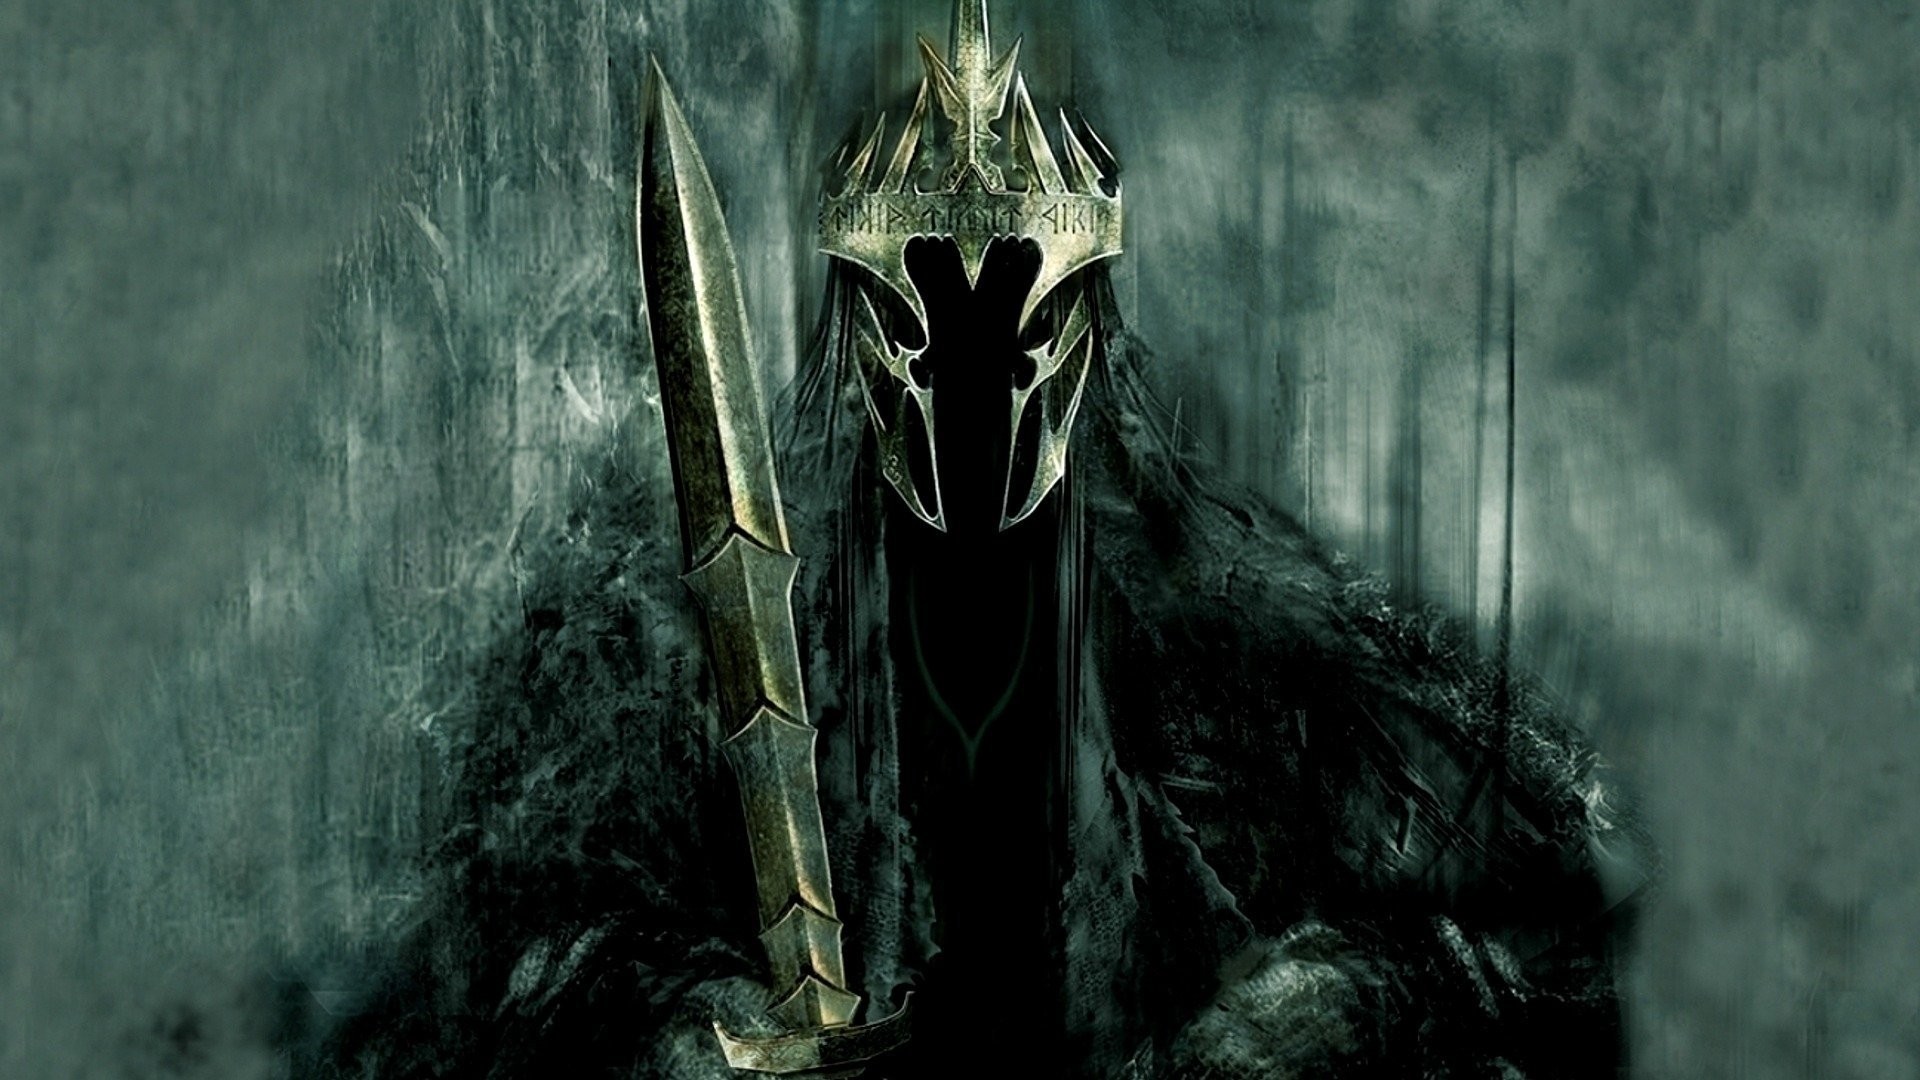 1920x1080 r. r. tolkien the lord of the rings lord of the rings witch-king